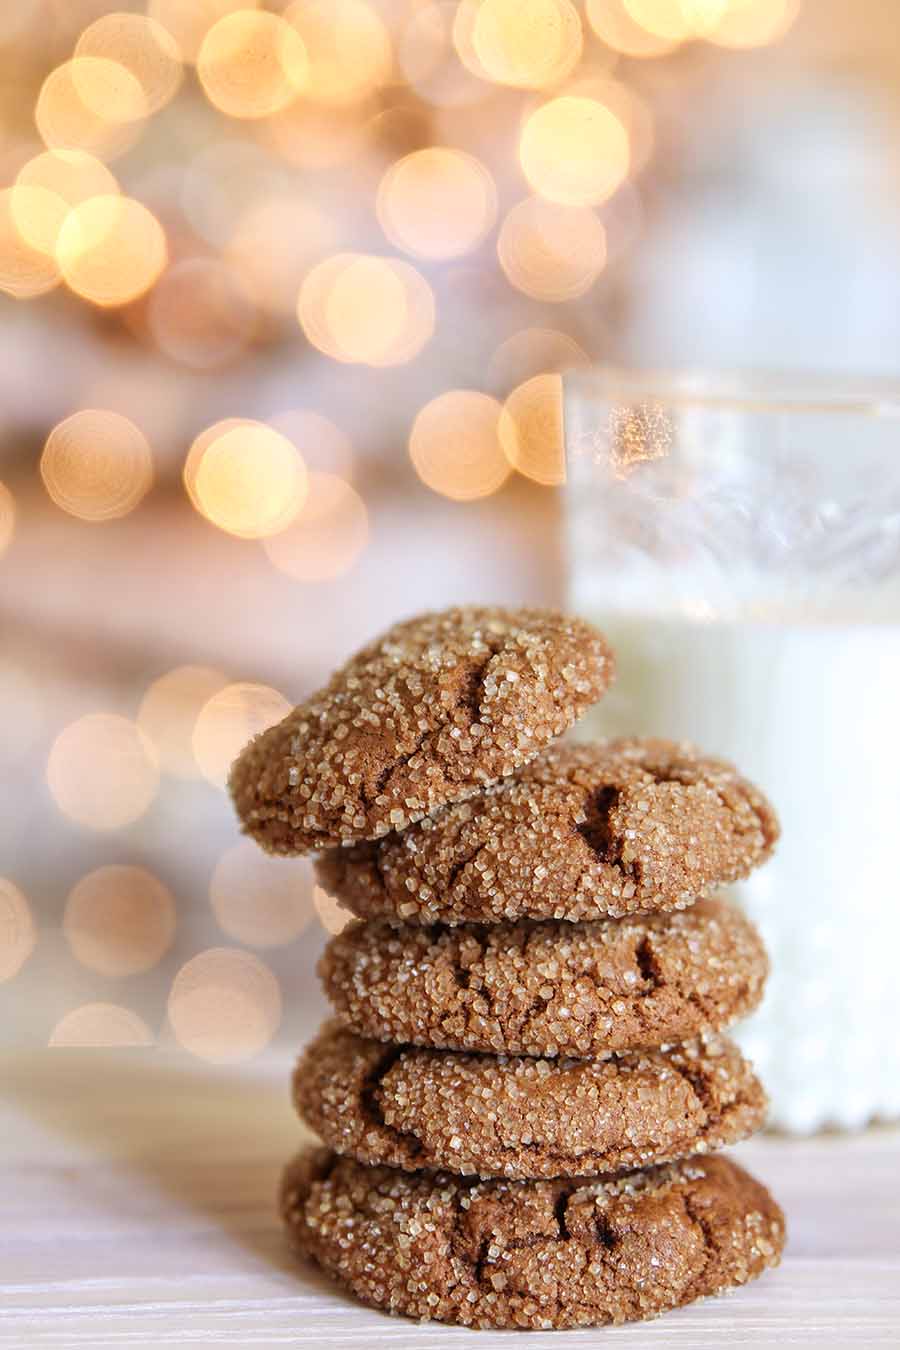 Spic Chewy Ginger Molasses Cookies Recipe. Here are 10 Comfort Food Cookies that are family favorites. There is such a wide variety of cookies that I'm sure you'll enjoy some of them. If you like chocolate chip, peanut butter, molasses, almond and biscotti than you'll love this collection. #cookies #bestcookies #baking #recipes #cookierecipes #chocolatechip